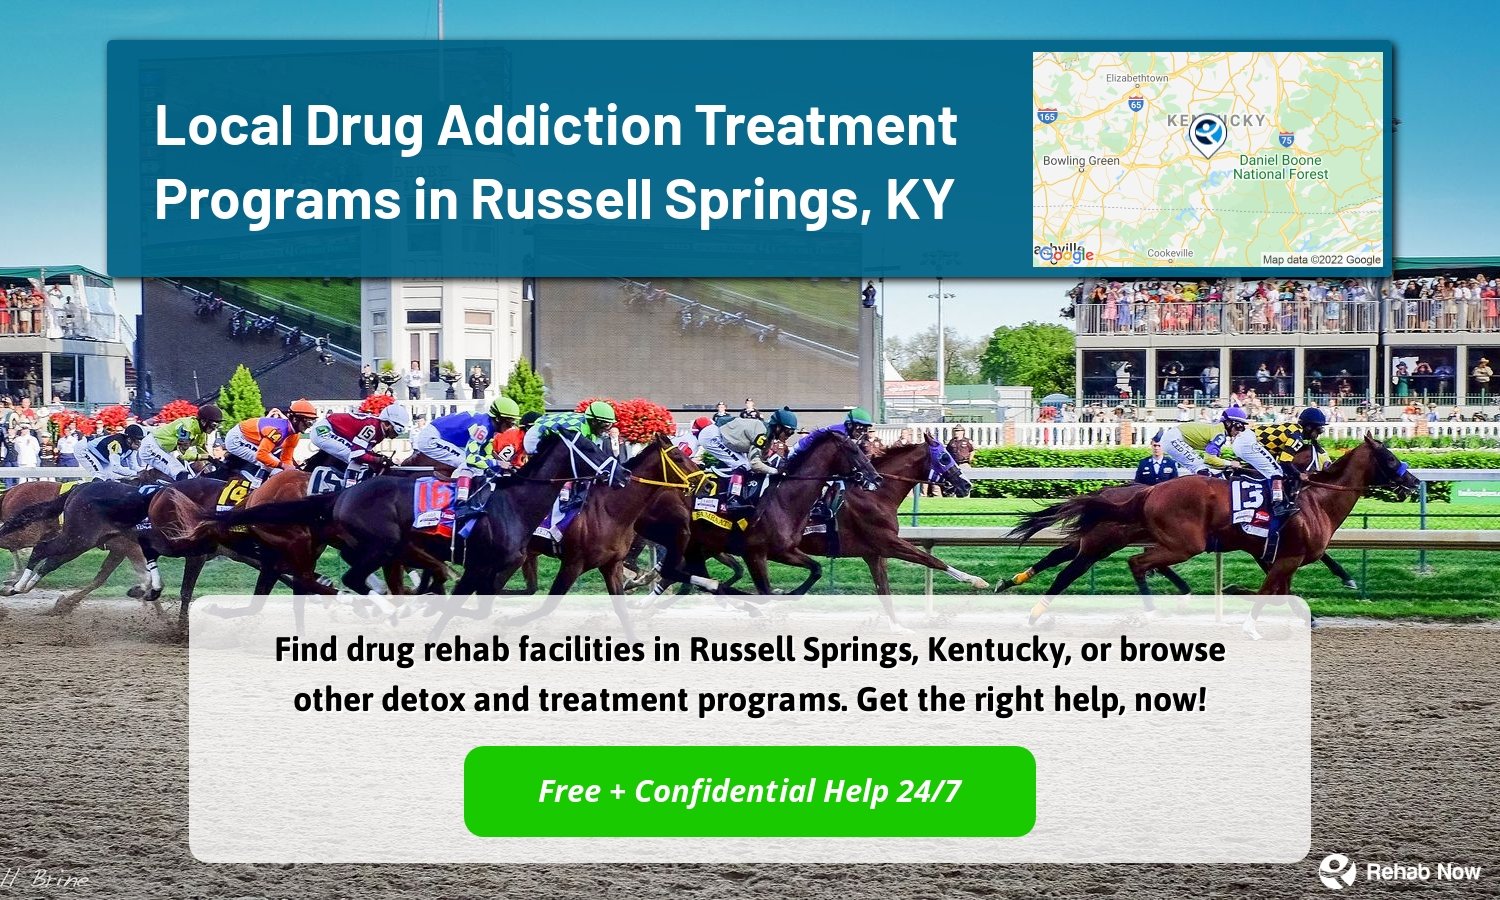 Find drug rehab facilities in Russell Springs, Kentucky, or browse other detox and treatment programs. Get the right help, now!